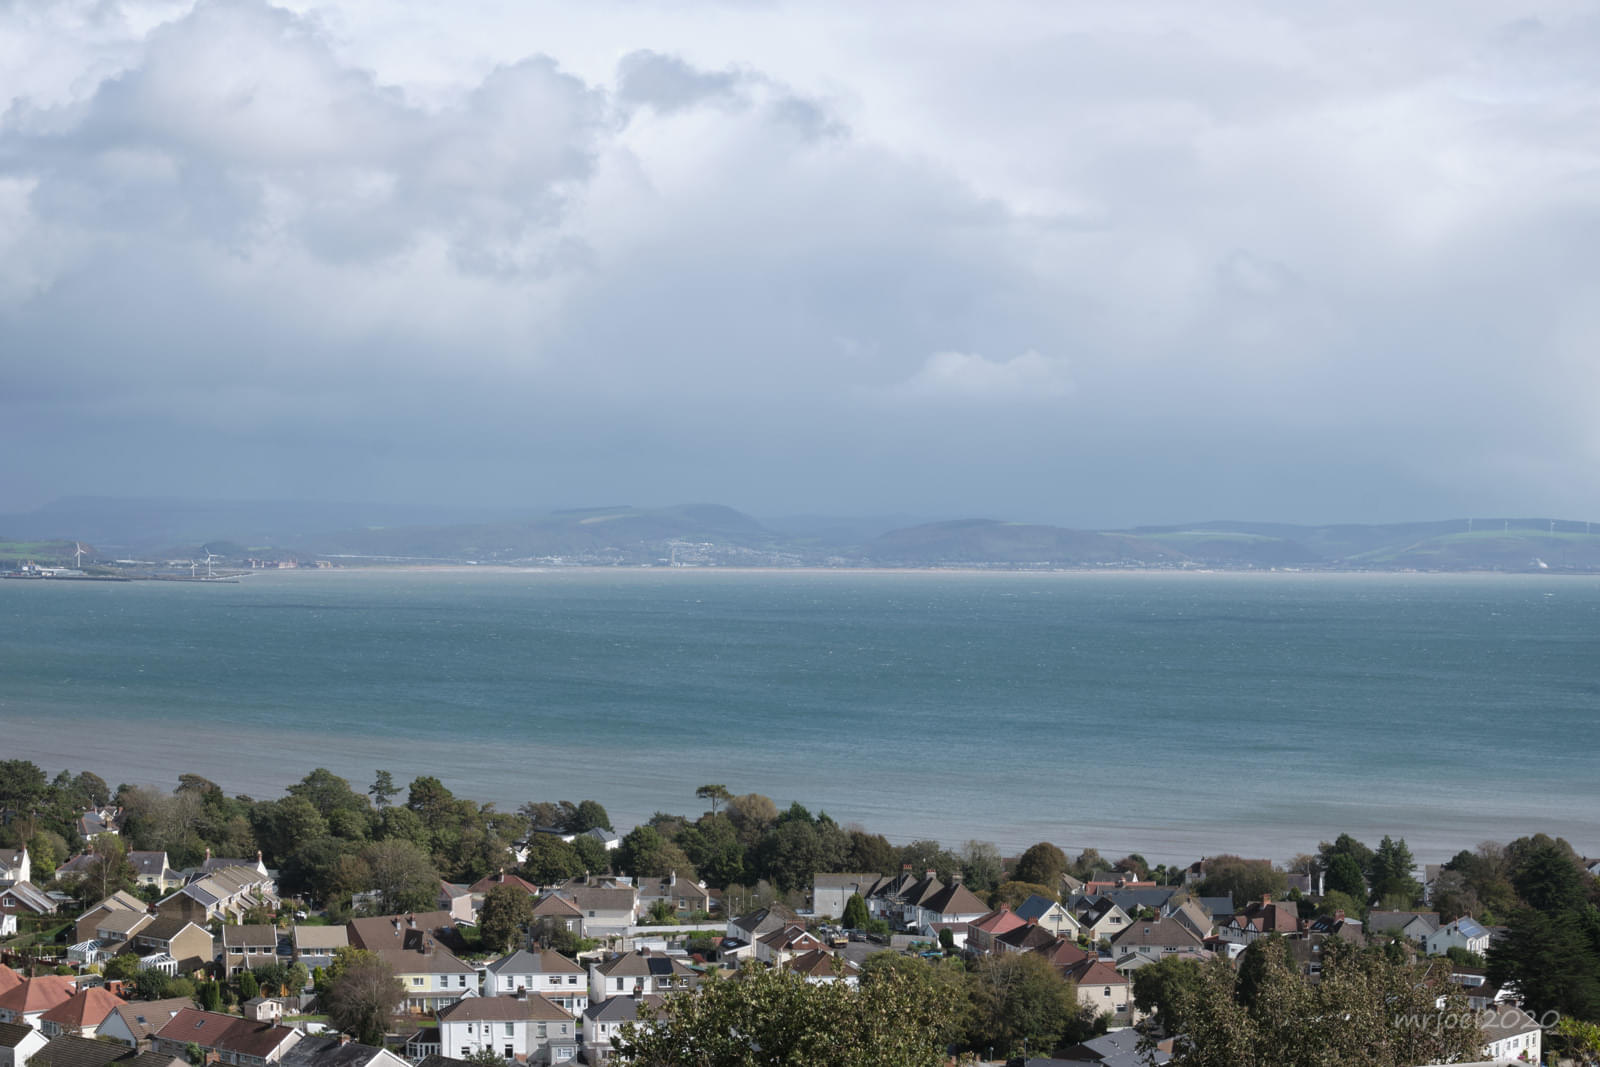 The Mumbles and Swansea Bay